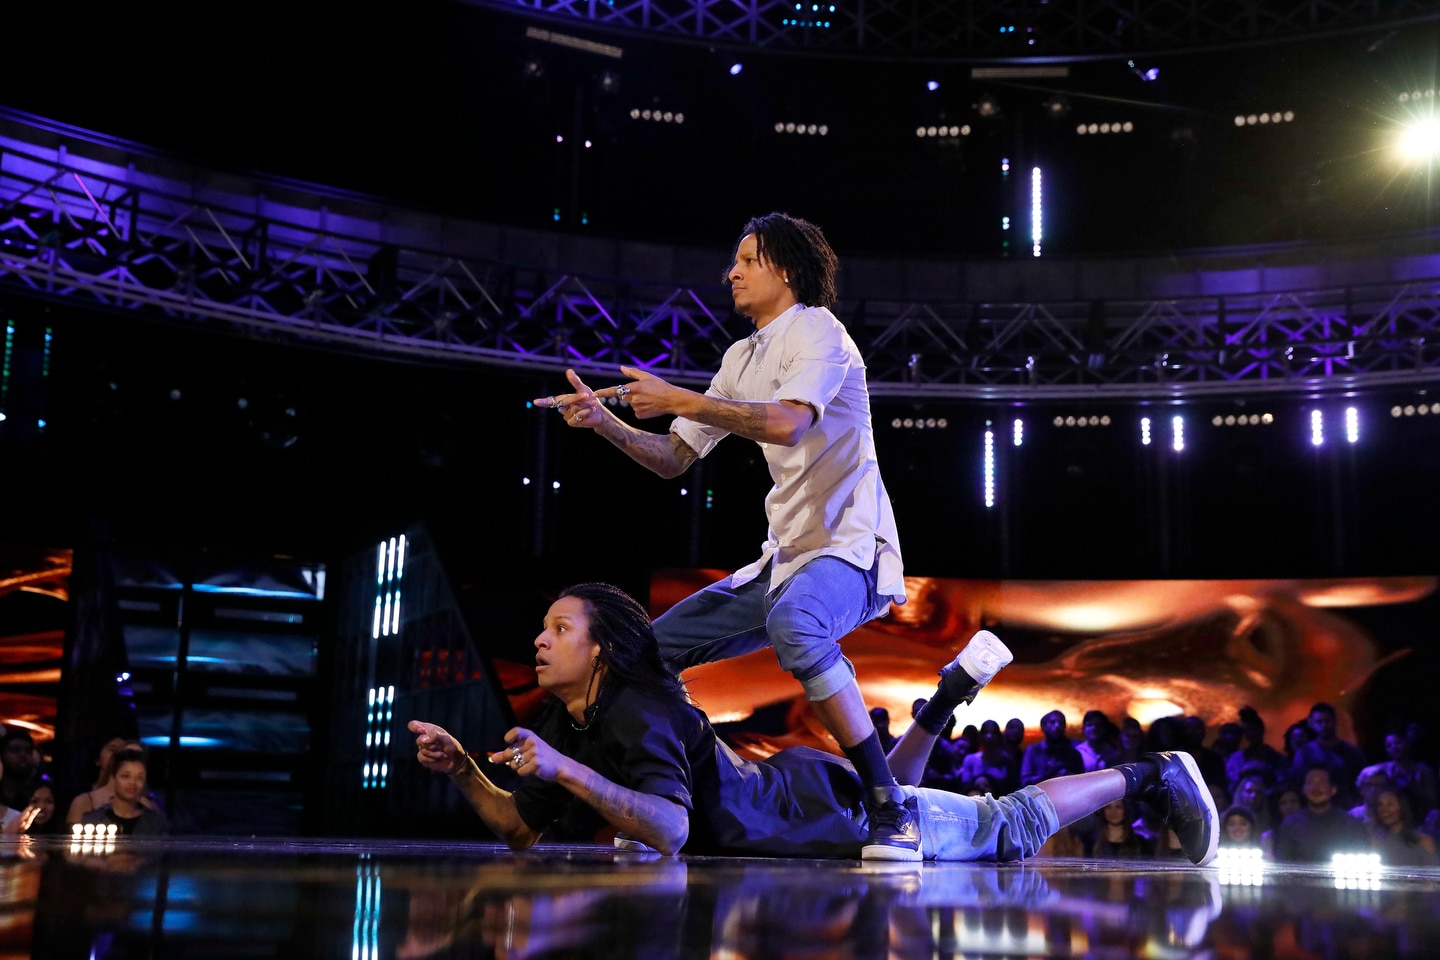 World performance. Les Twins World of Dance 2017. Les Twins World of Dance. Les Twins танцуют. Канал "World of Dance 2018" youtube.